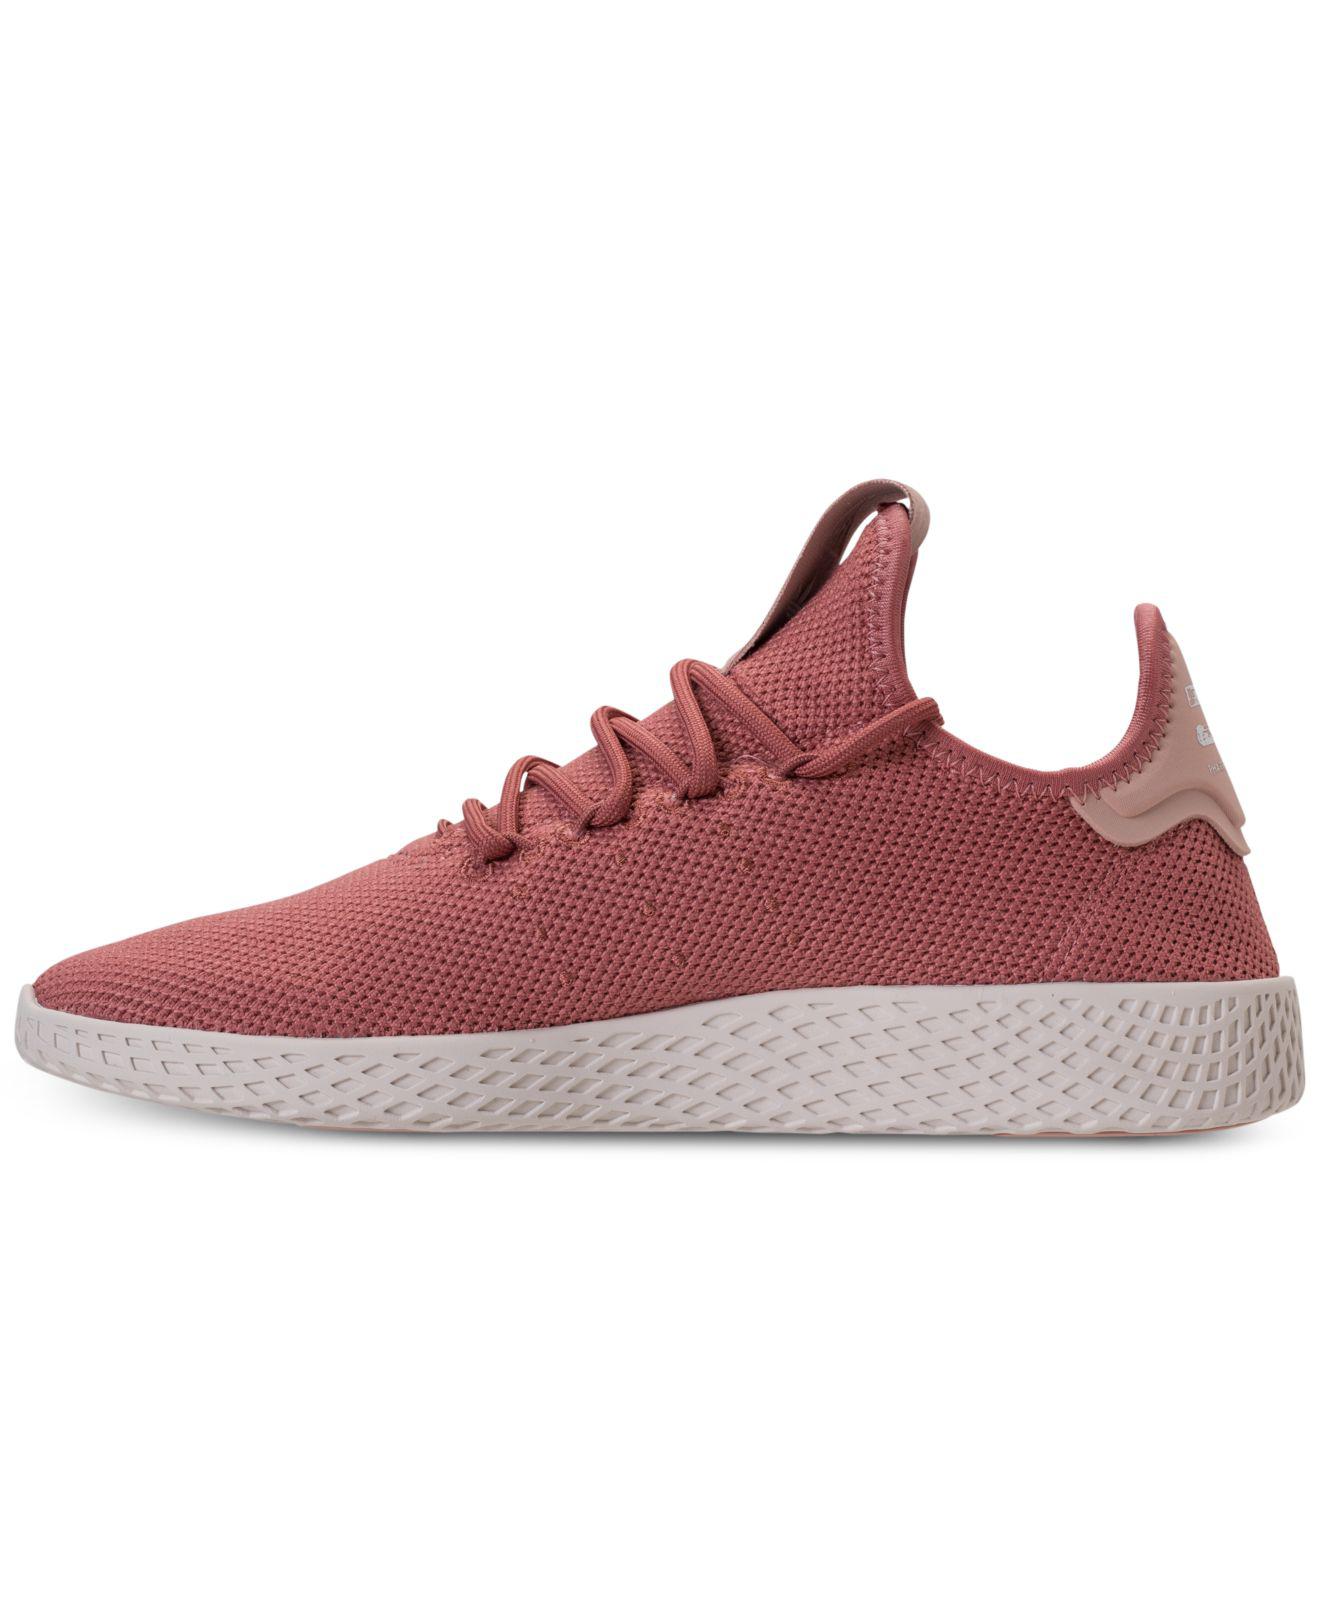 adidas Synthetic Women's Originals Pharrell Williams Tennis Hu Casual  Sneakers From Finish Line in Ash Pink/Chalk White (Pink) - Lyst